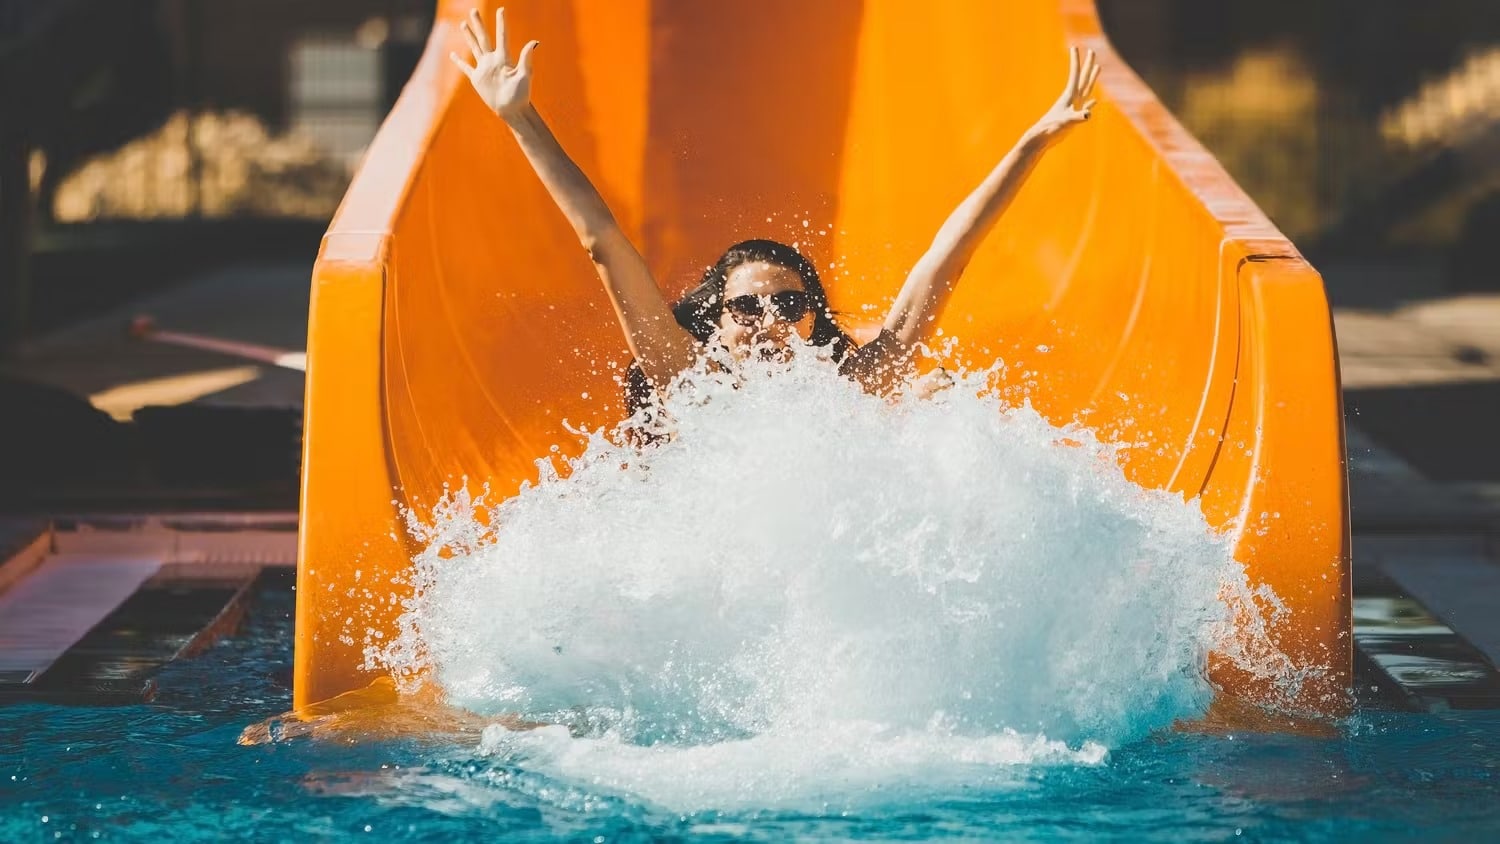 Possible Risks of Visiting Water Parks in Pregnancy